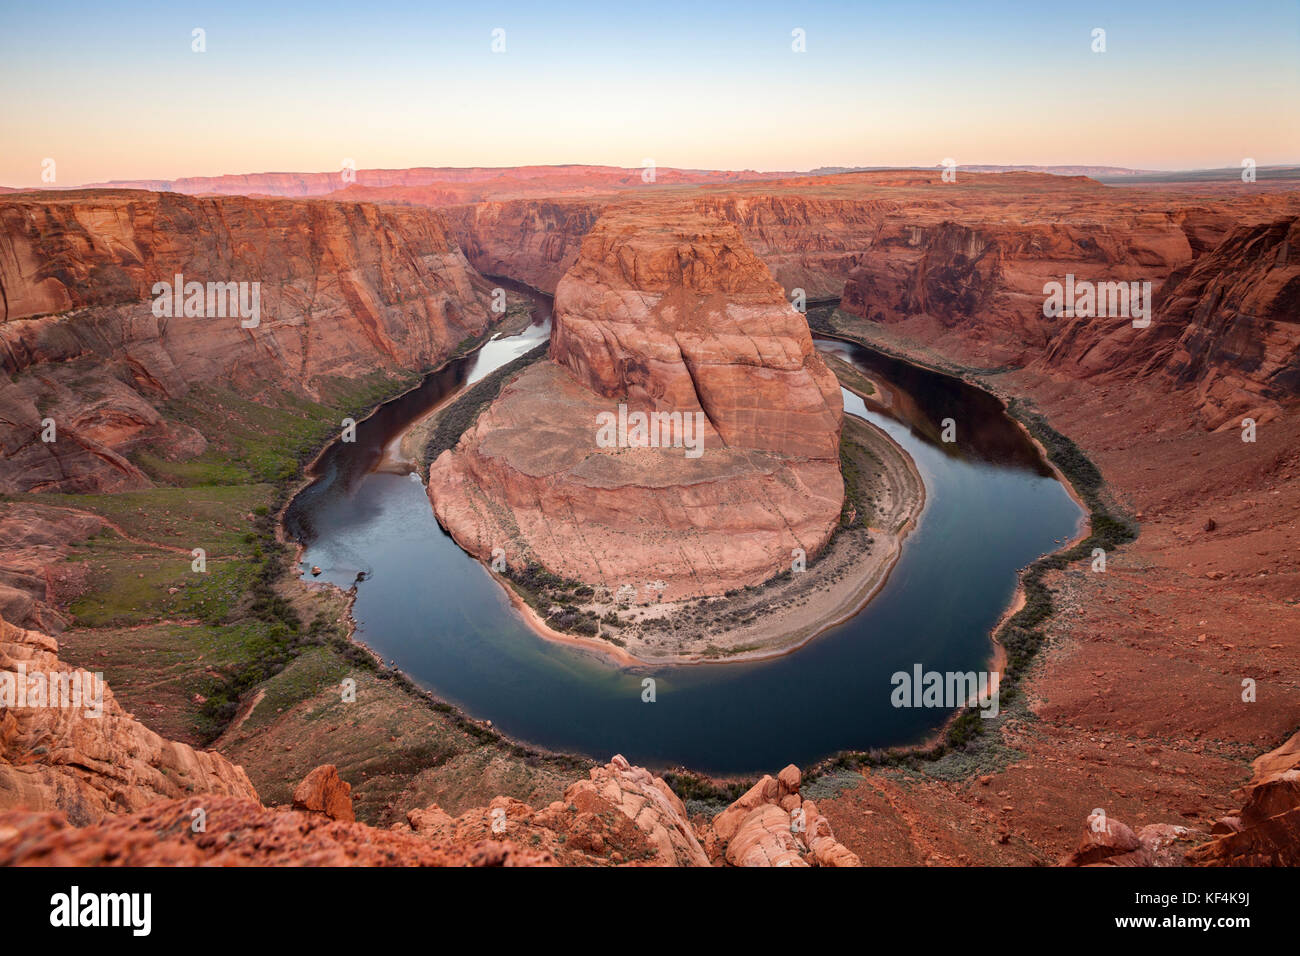 horseshoe Bend, a meander of the Colorado River in the Glen Canyon area of Arizona, at sunrise. Stock Photo